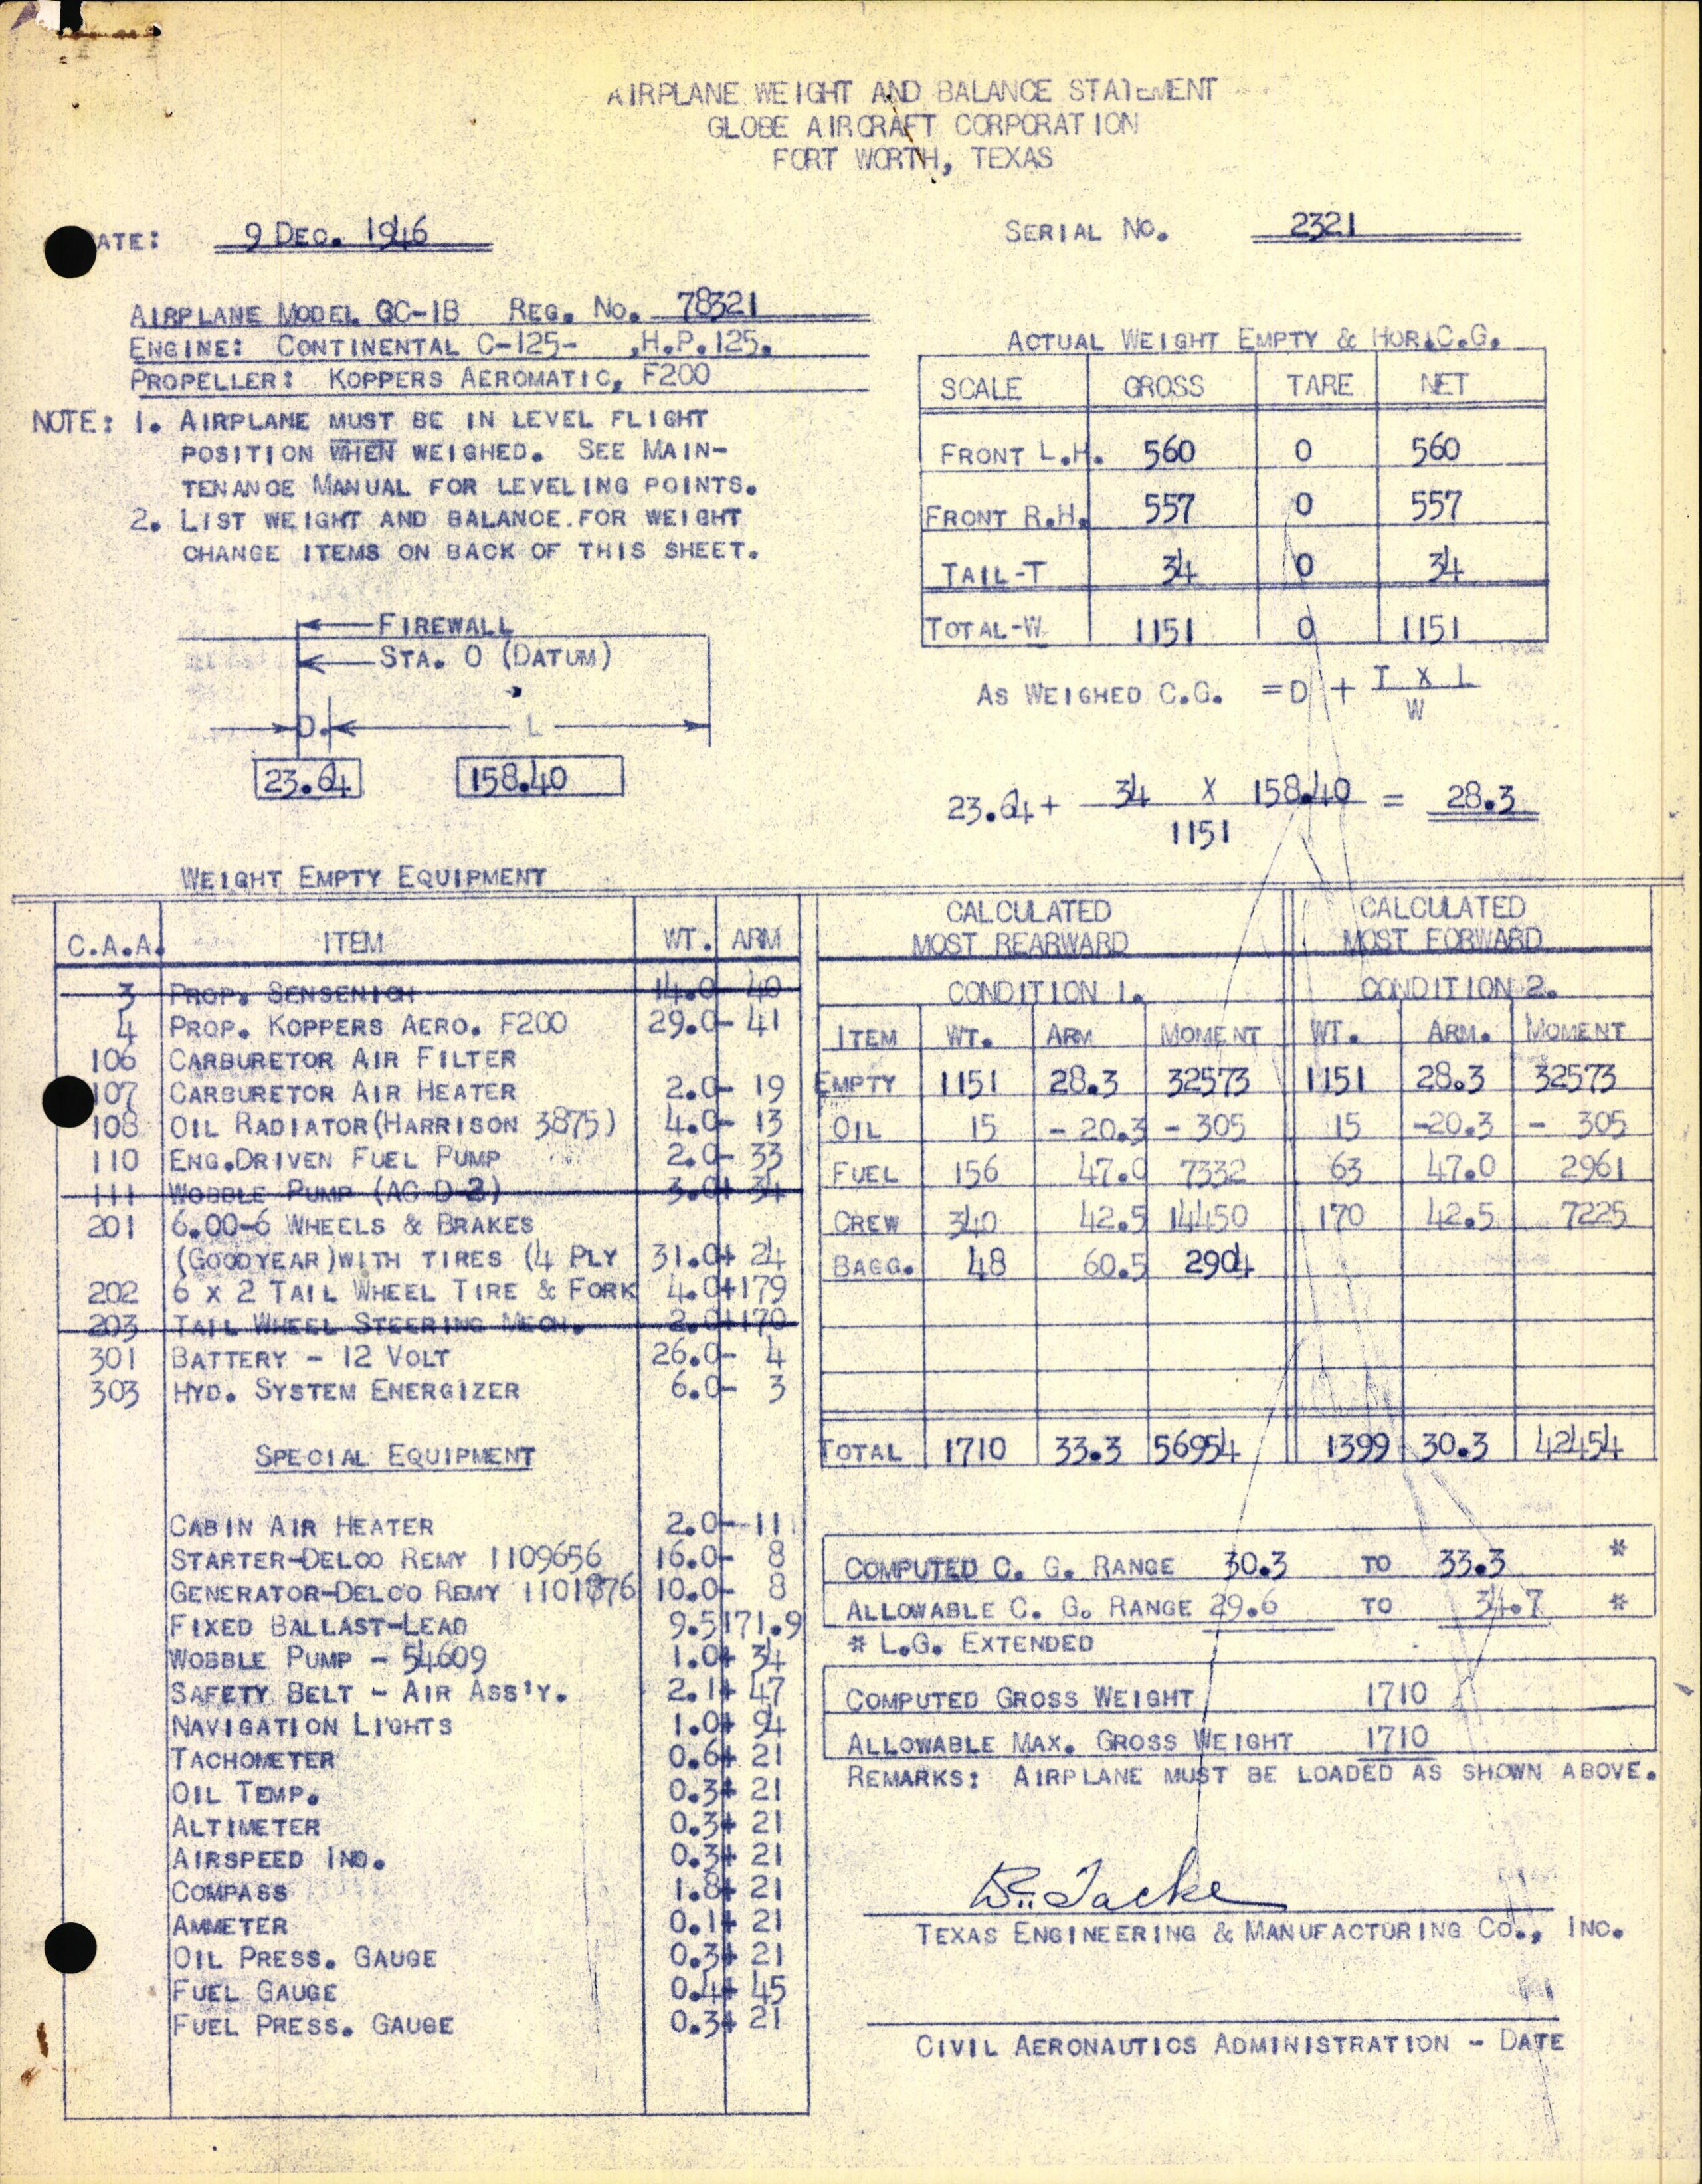 Sample page 3 from AirCorps Library document: Technical Information for Serial Number 2321